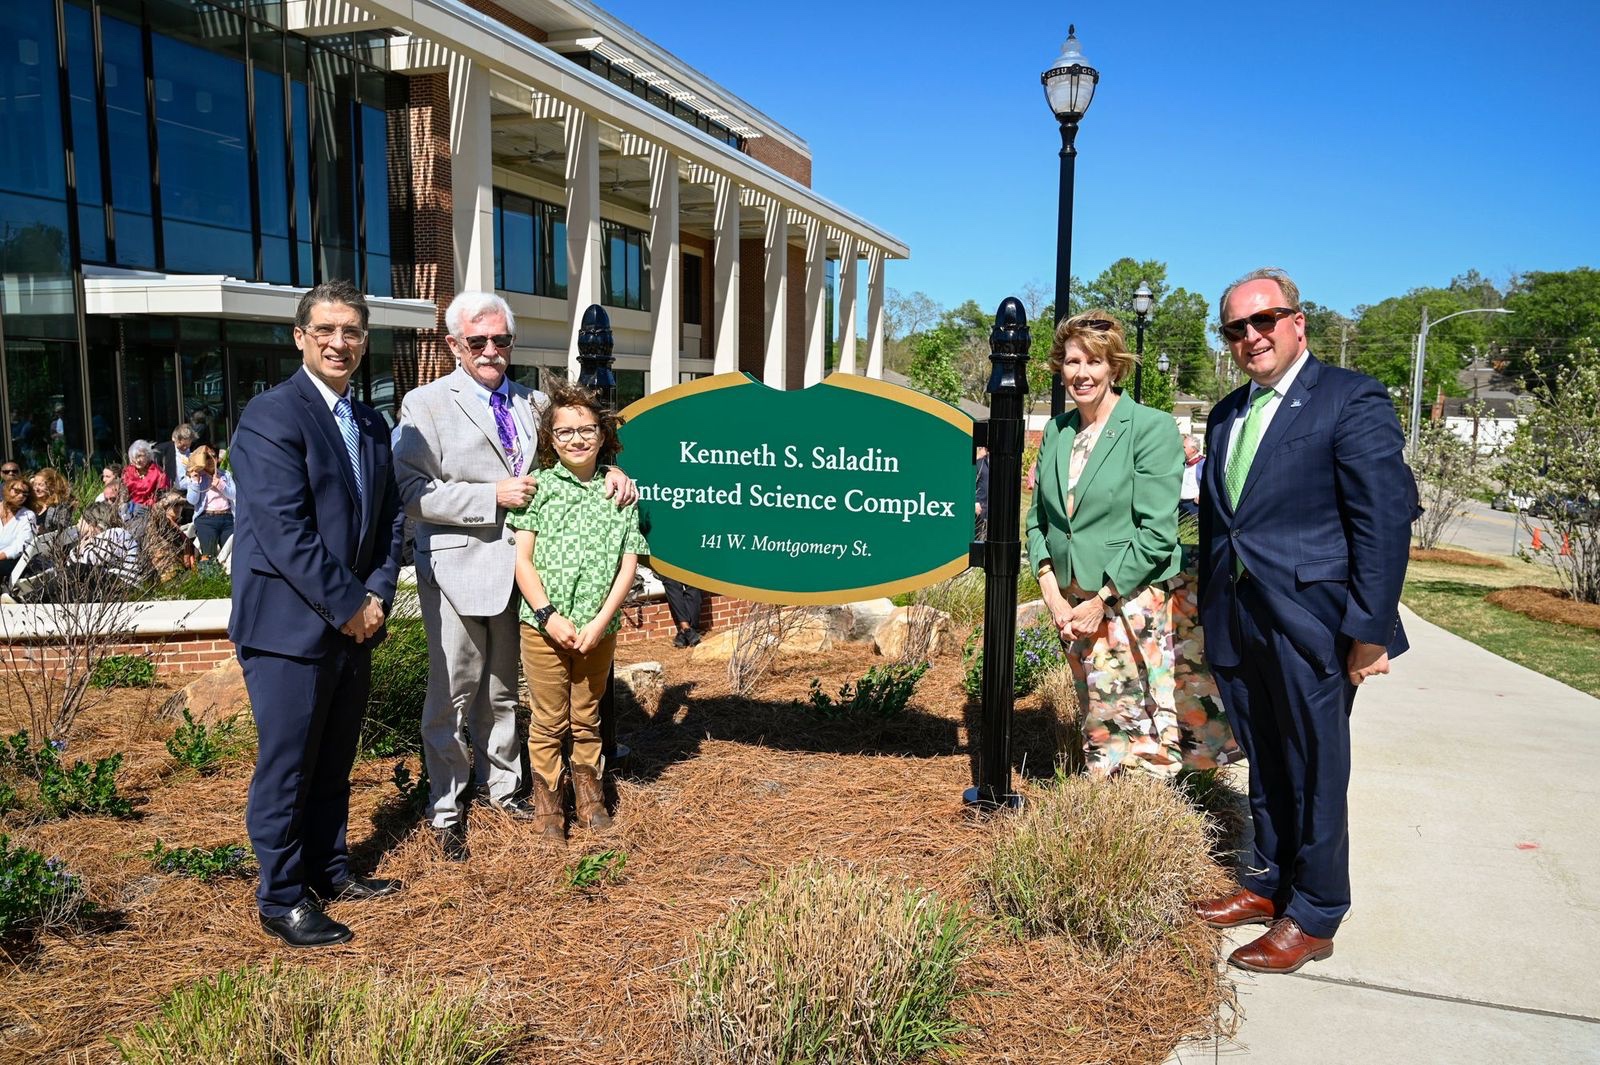 From left: Provost Dr. Costas Spirou, Dr. Kenneth Saladin with his grandson, President Cathy Cox and Vice President of University Advancement Seth Walker.